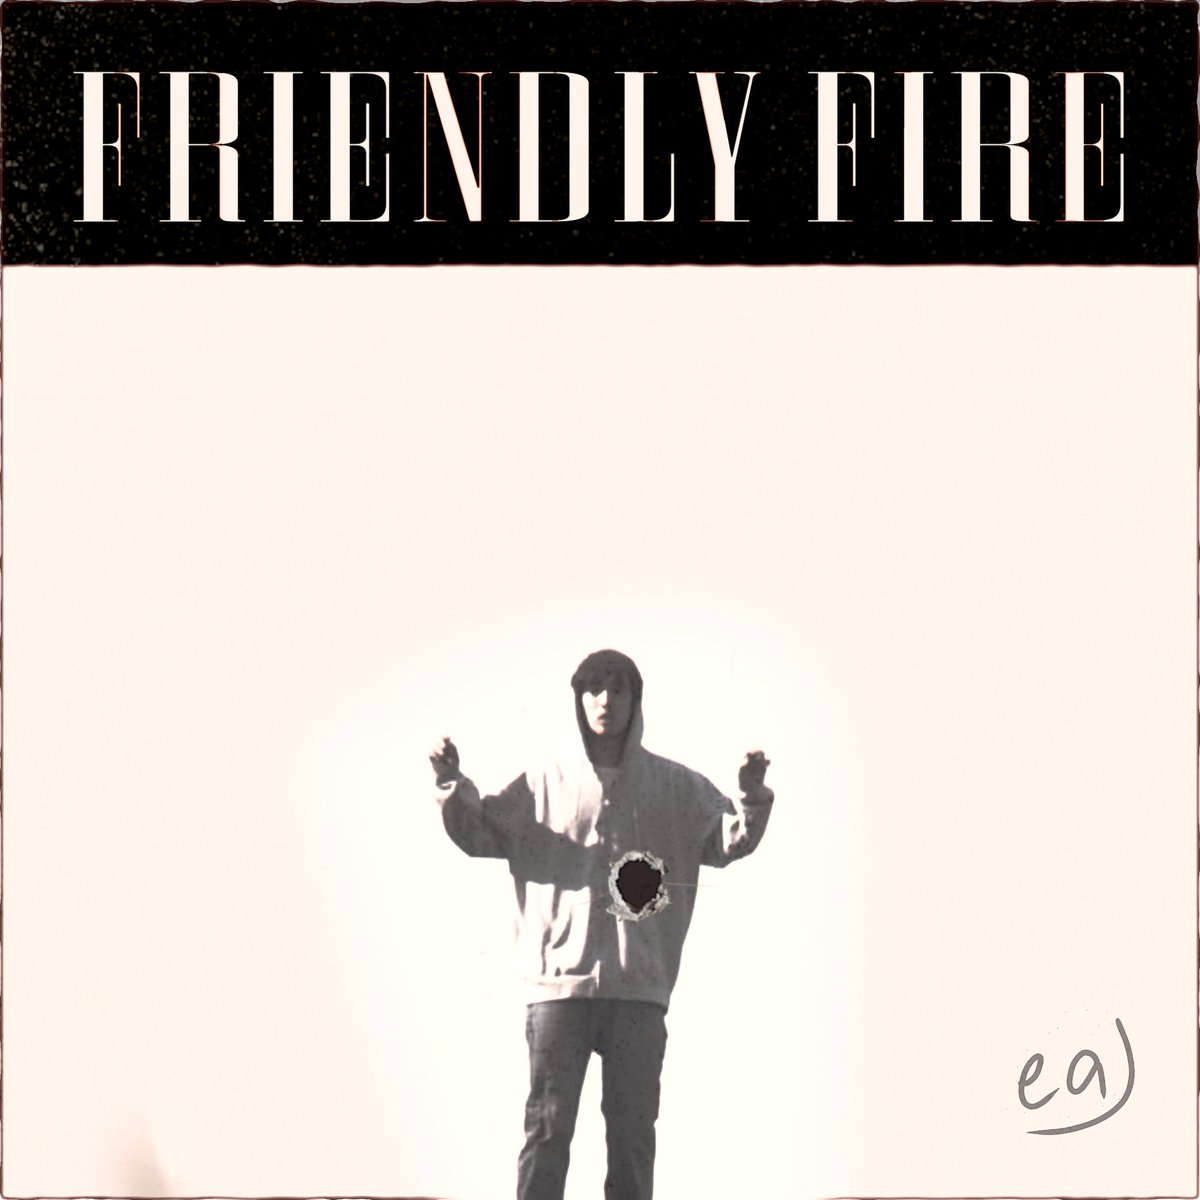 friendly fire finally out! Been playing it live for over a year so were really hoping you guys enjoy this one 🥳 #wtrsfm #eaJFriendlyFire #eaJarsAreTradingFriendlyFire